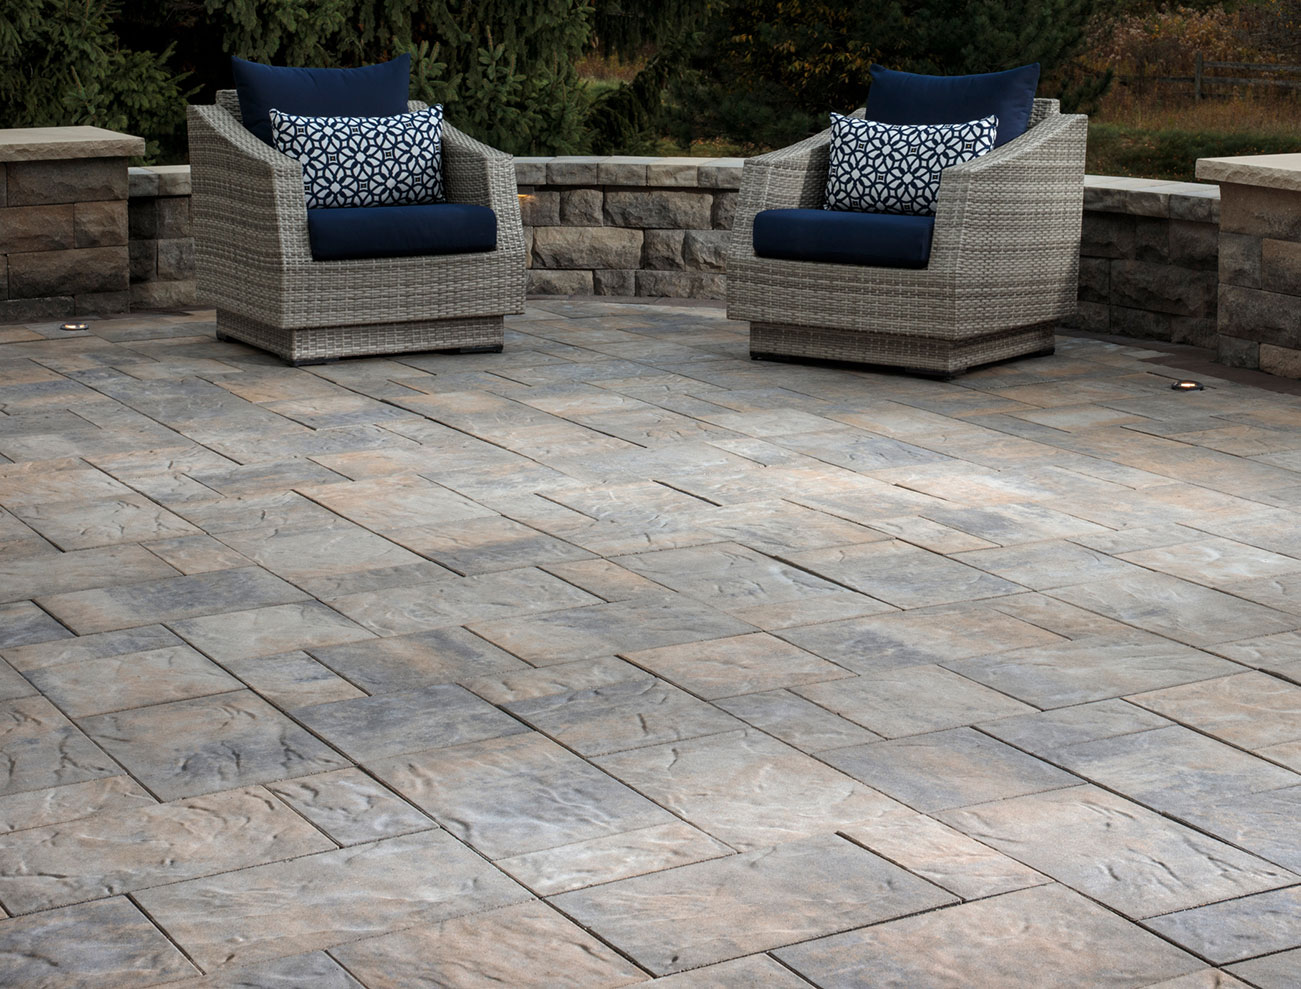 Ask us about our new Belgard® products!